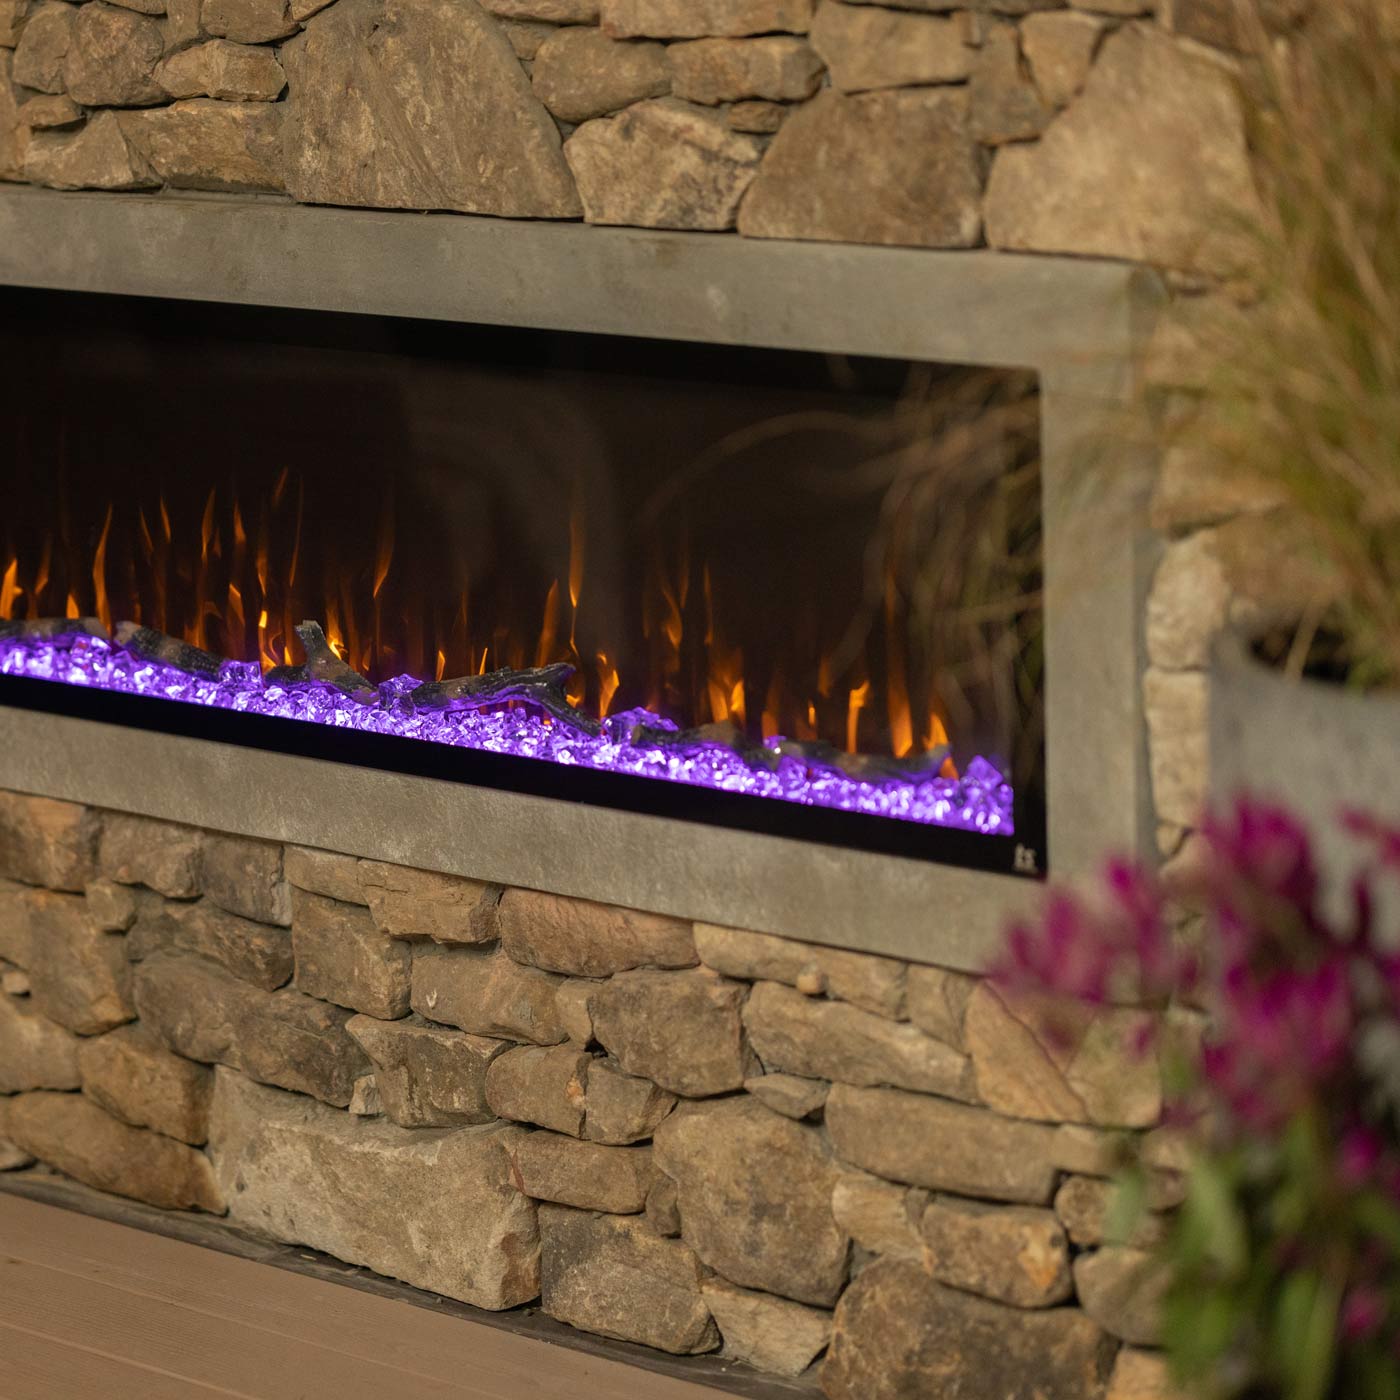 Touchstone Sideline Elite outdoor electric fireplace shown with purple base and orange flames